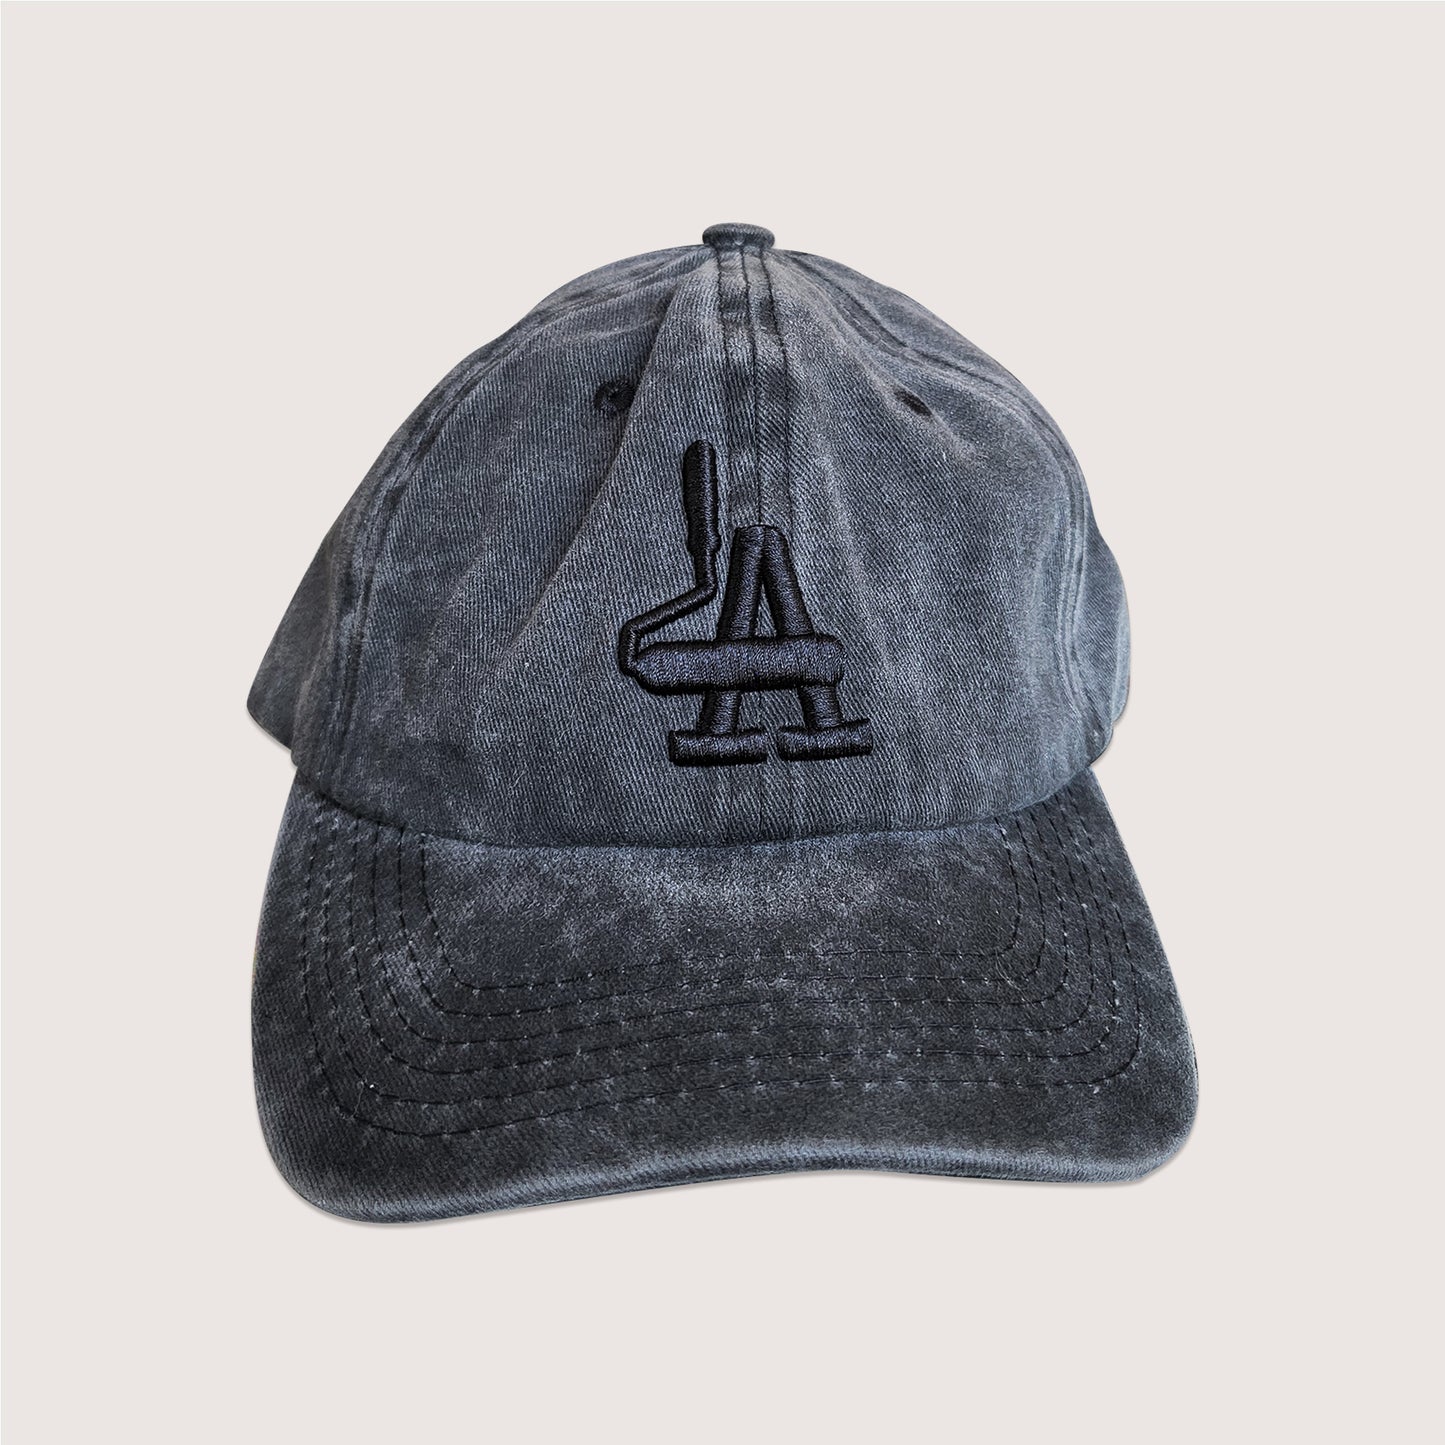 Locally branded unstructured cap in acid-washed black with black puff embroidery detail.